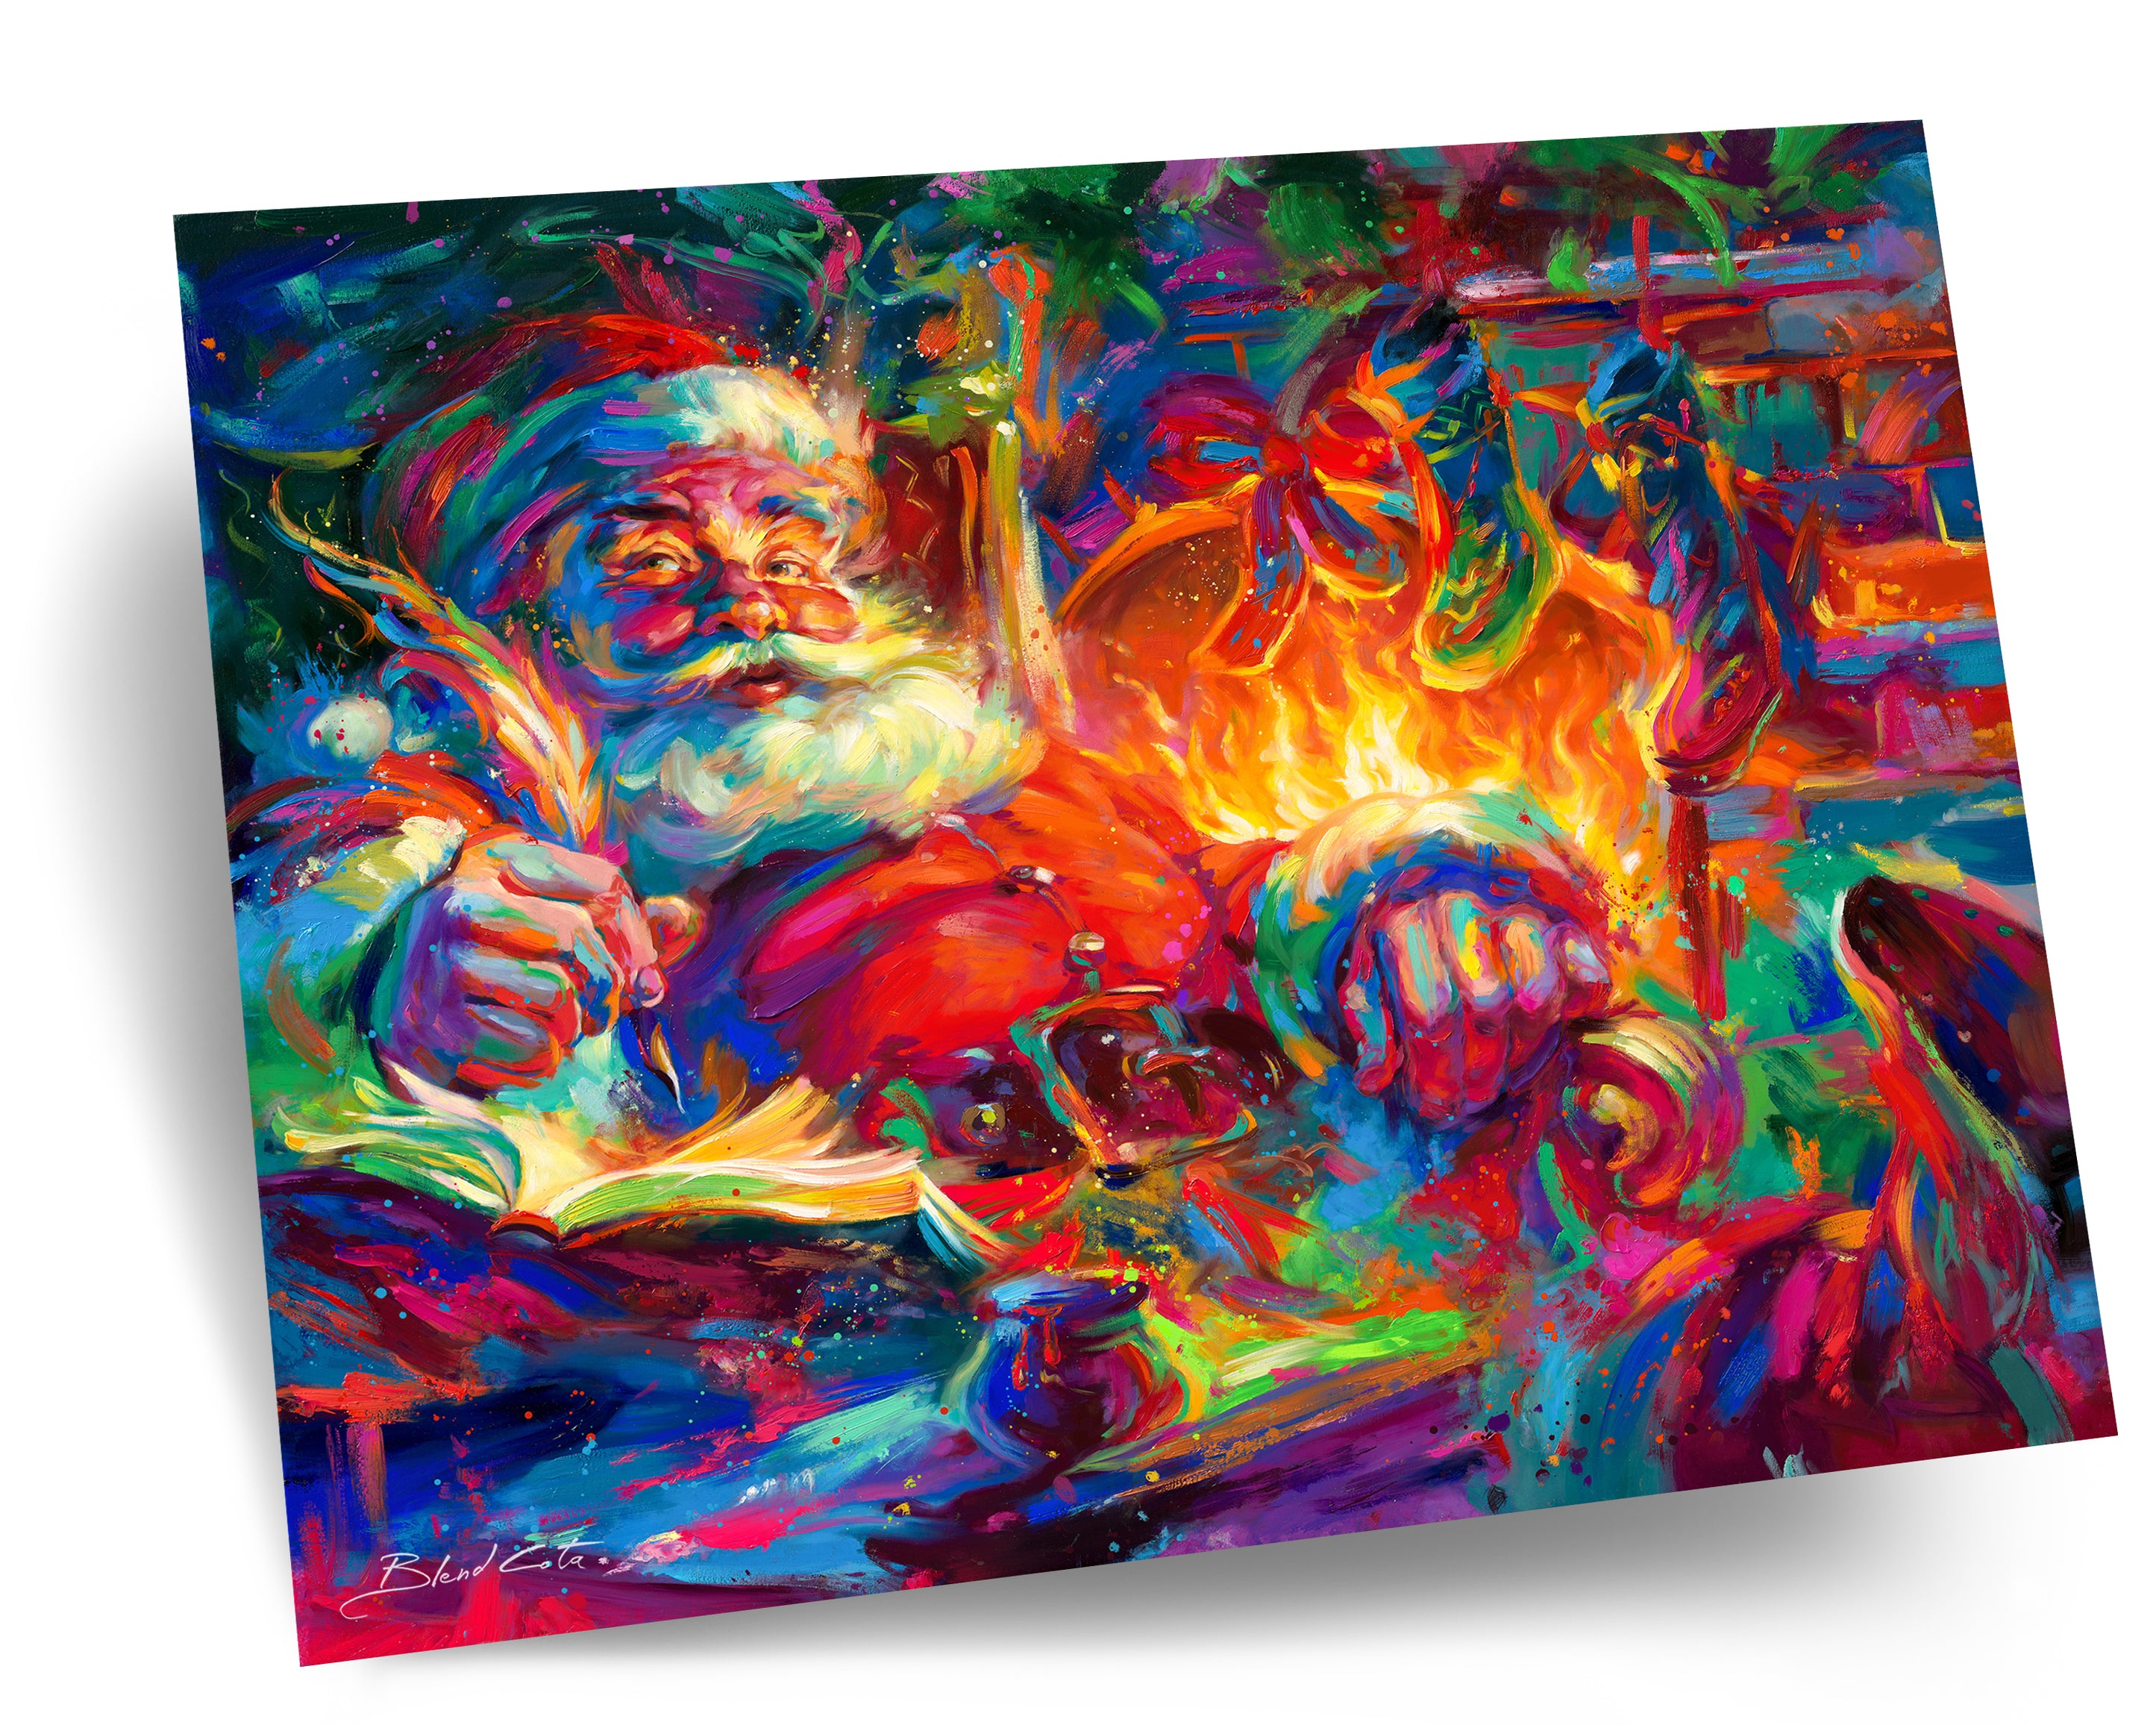 A friendly portrait of Santa at home cozy by the fireplace with large colorful brushstrokes.